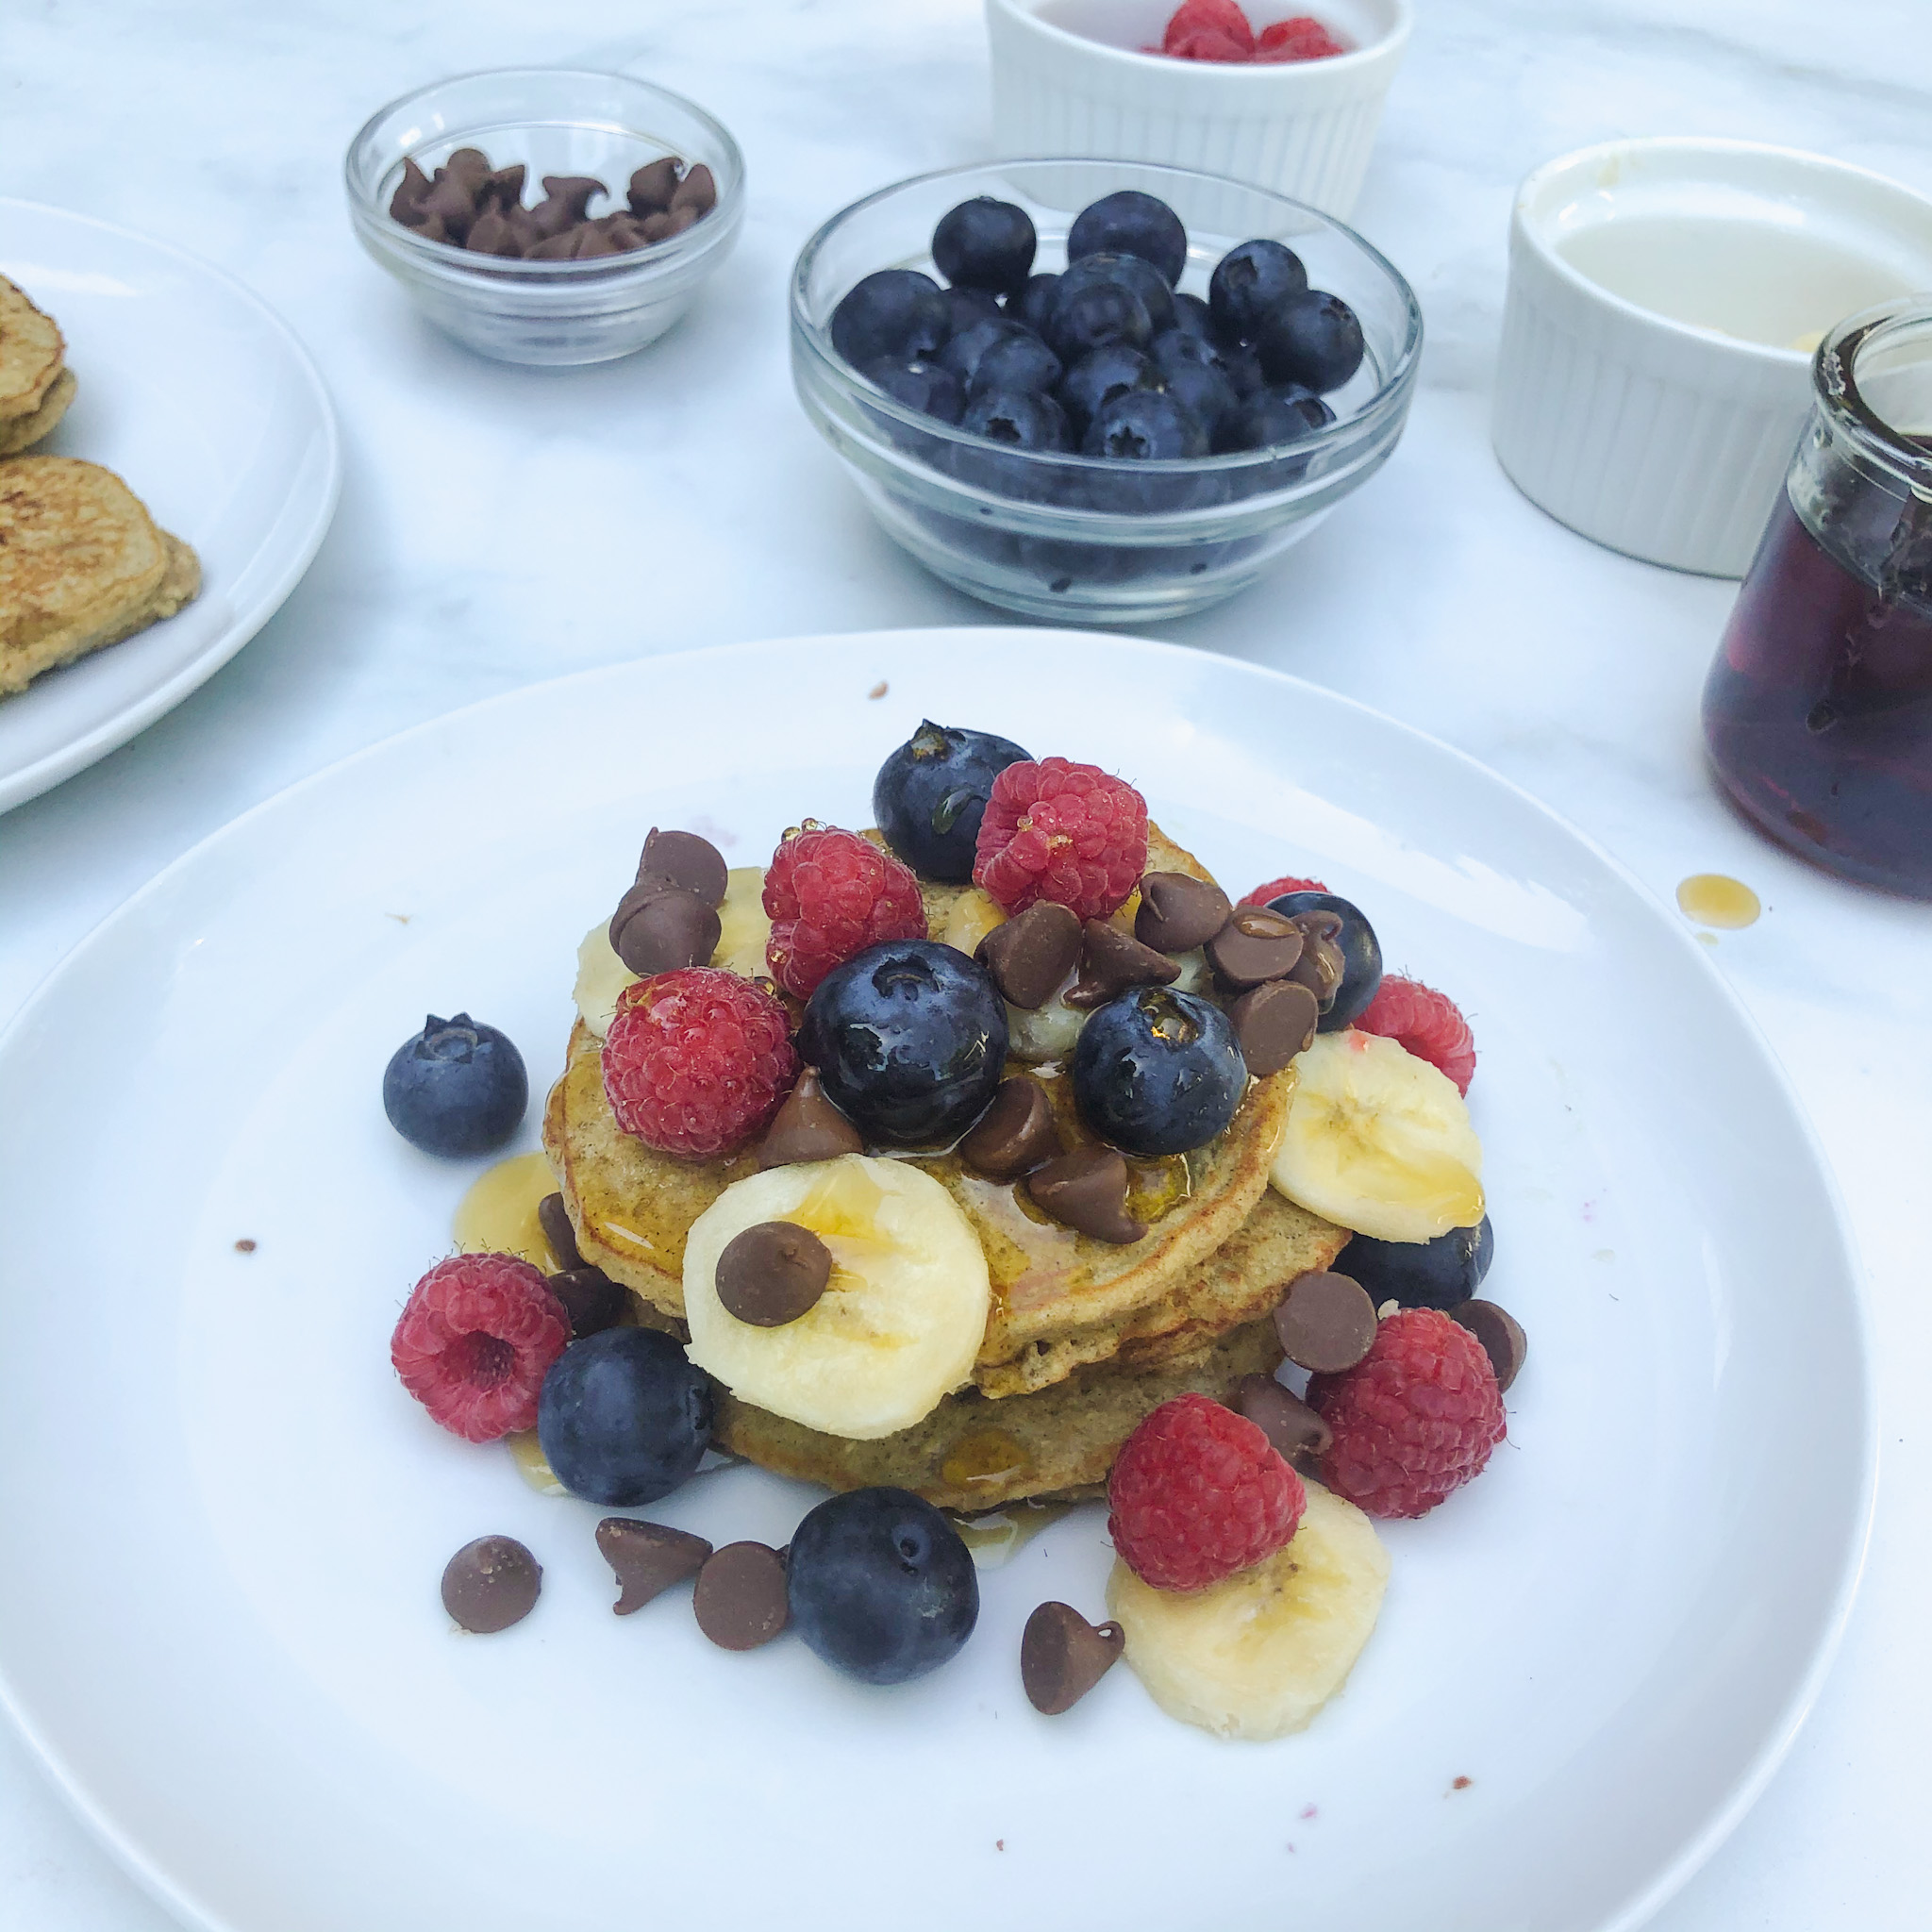 Finished plate of easy and healthy gluten free banana chocolate chip pancakes with fruit